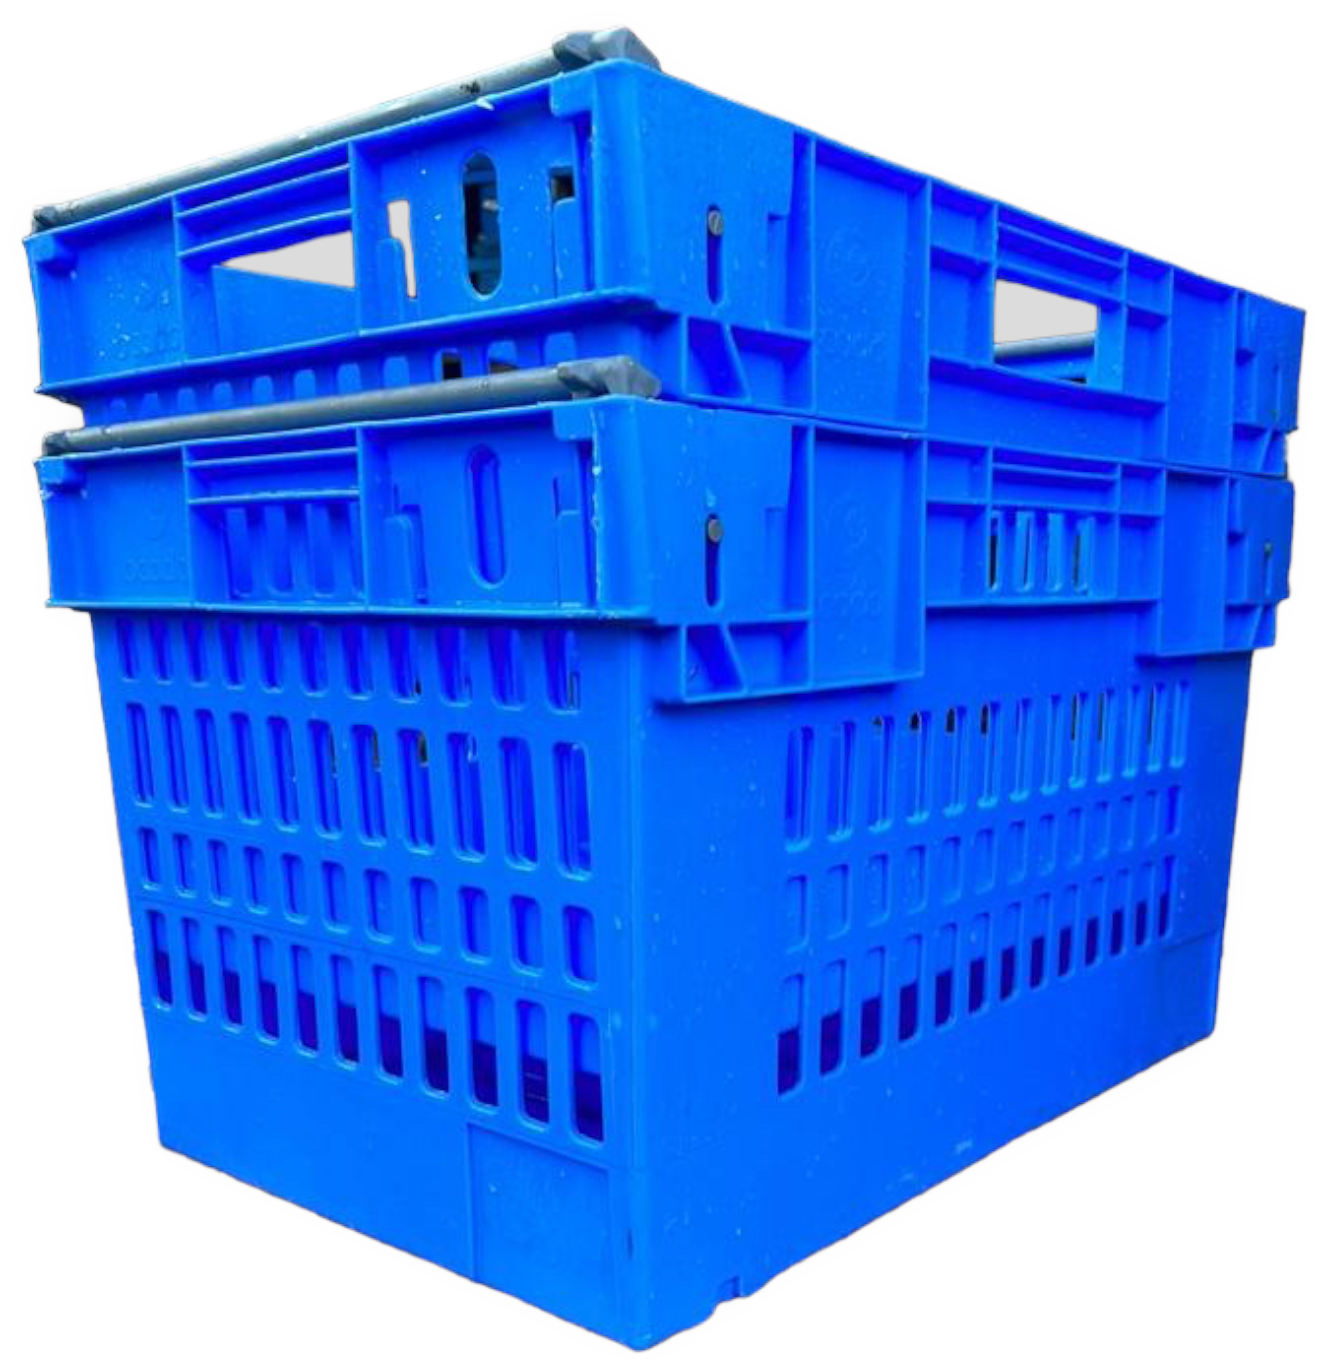 400x300x185 Bale Arm Crate Black 15LTR - Pack of 14 For Food Processing Sector